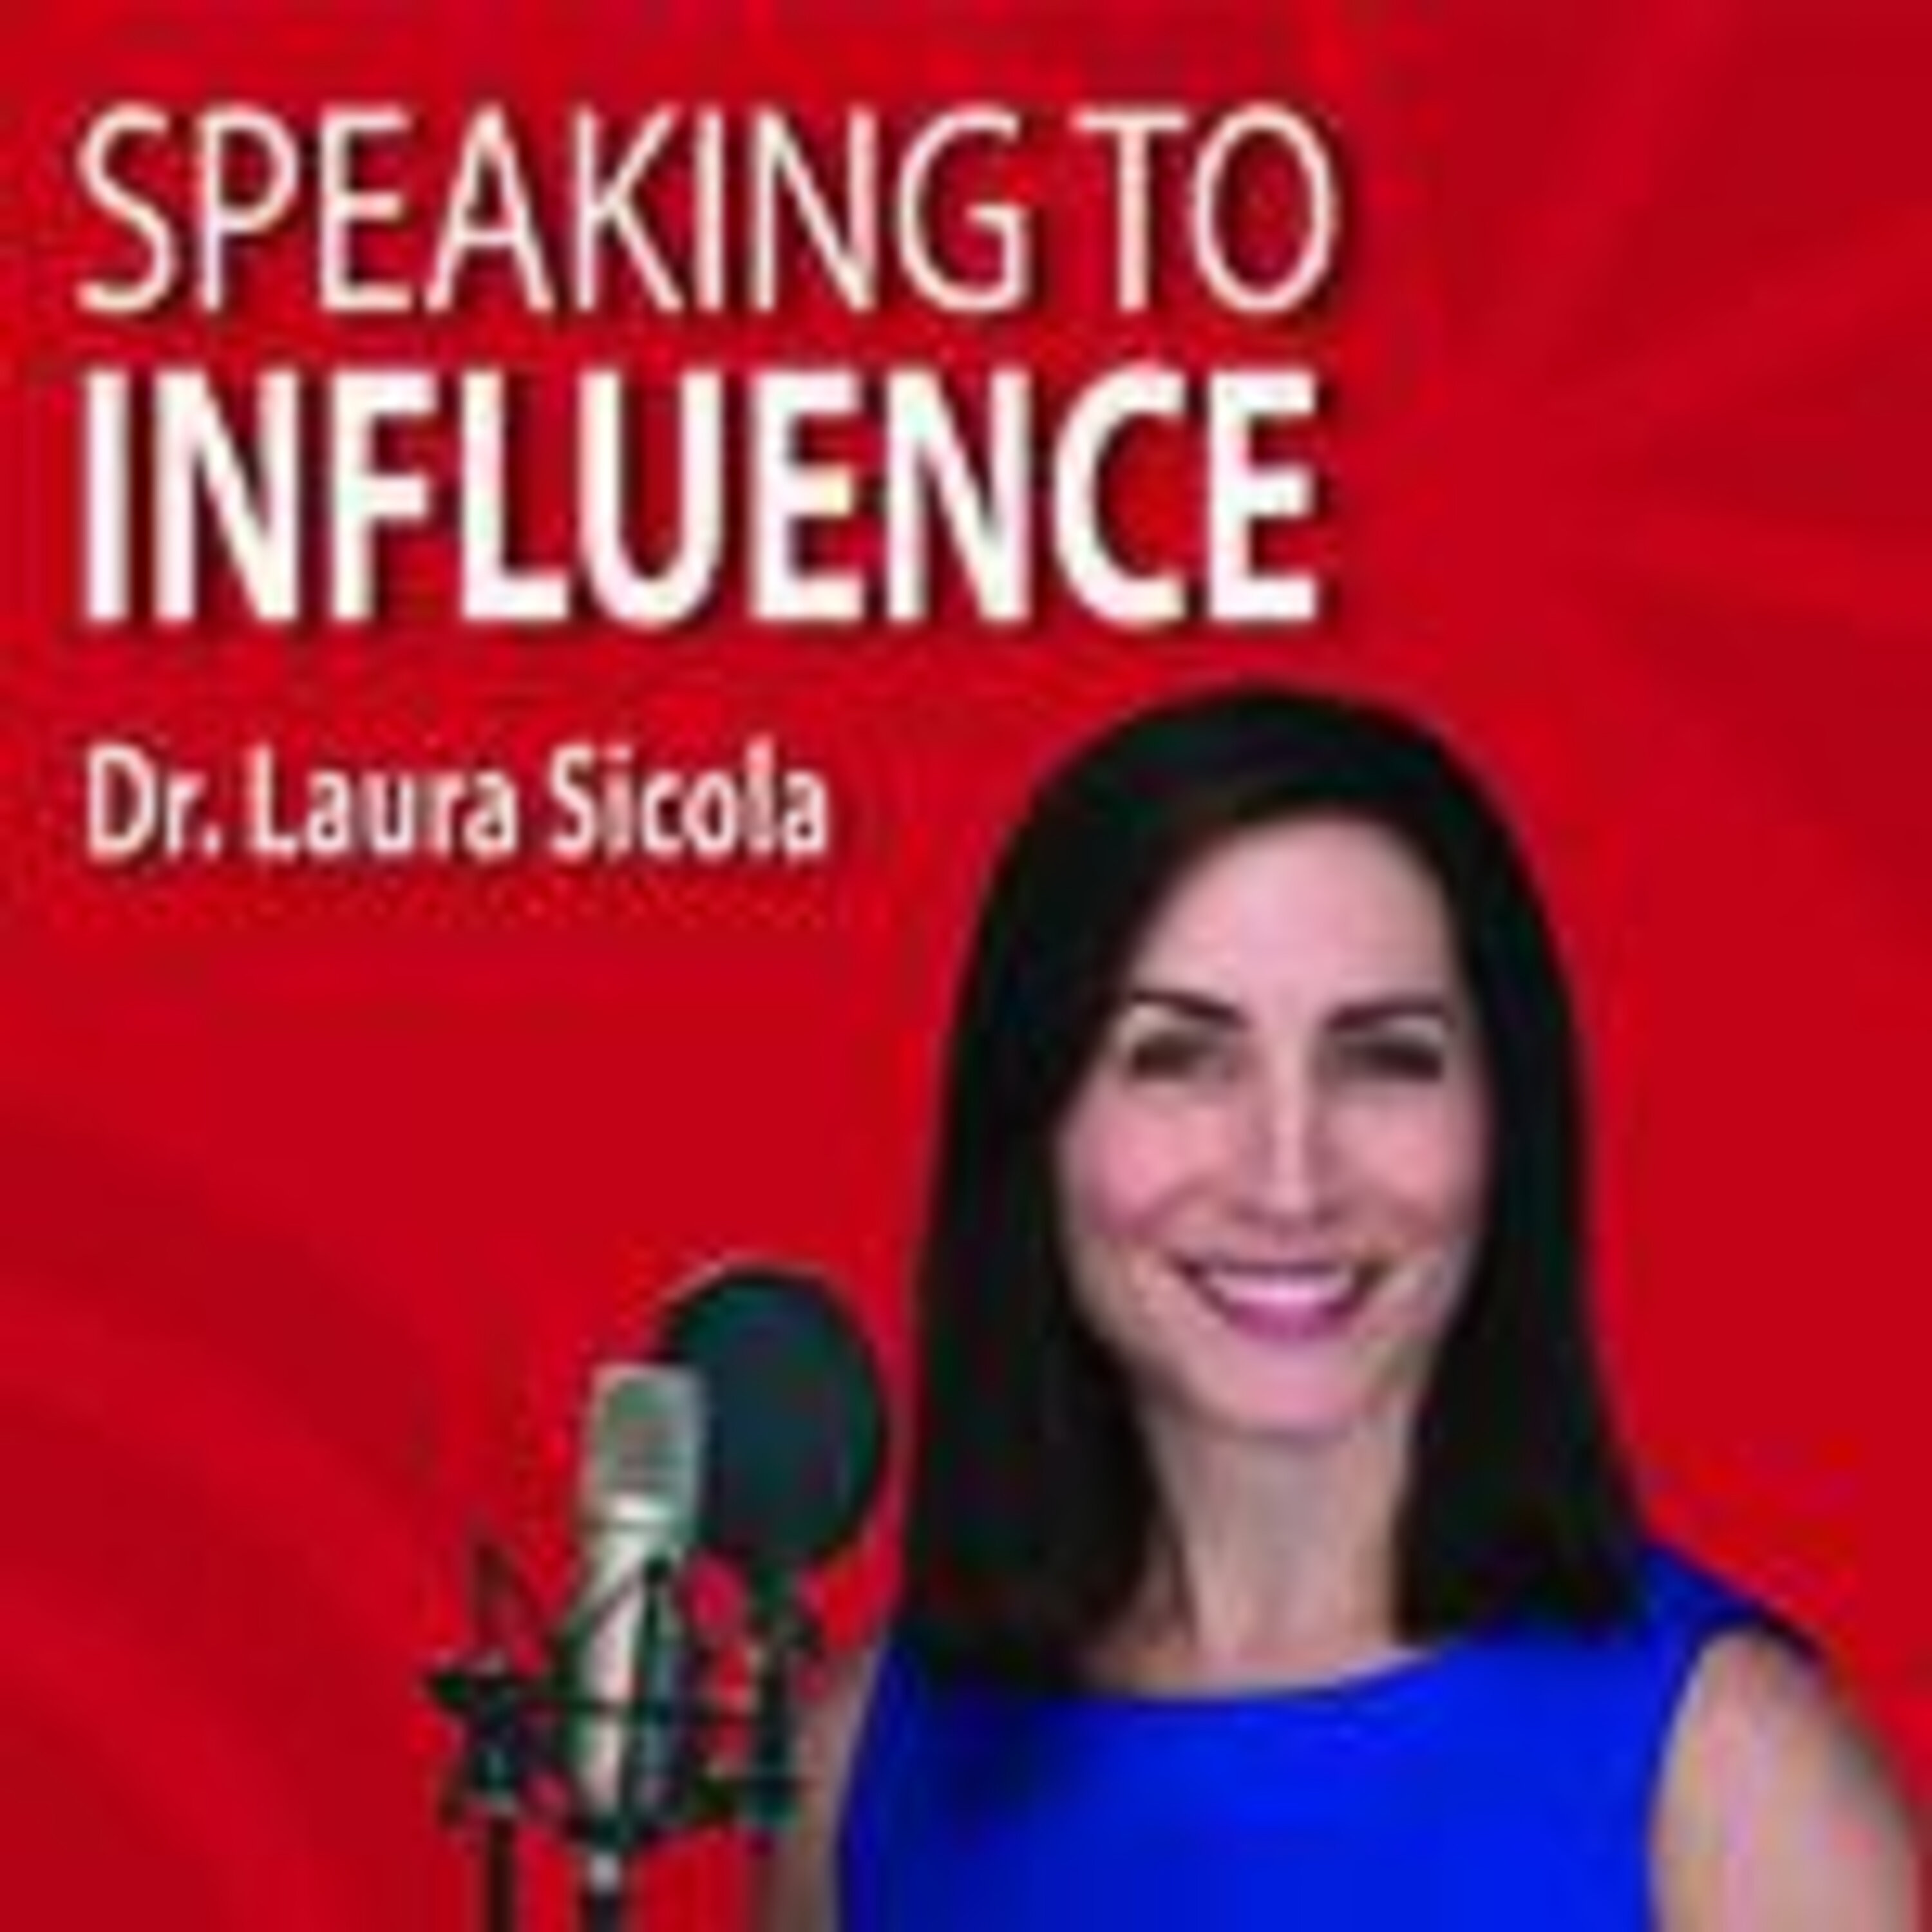 Take the 2021 Influence Challenge